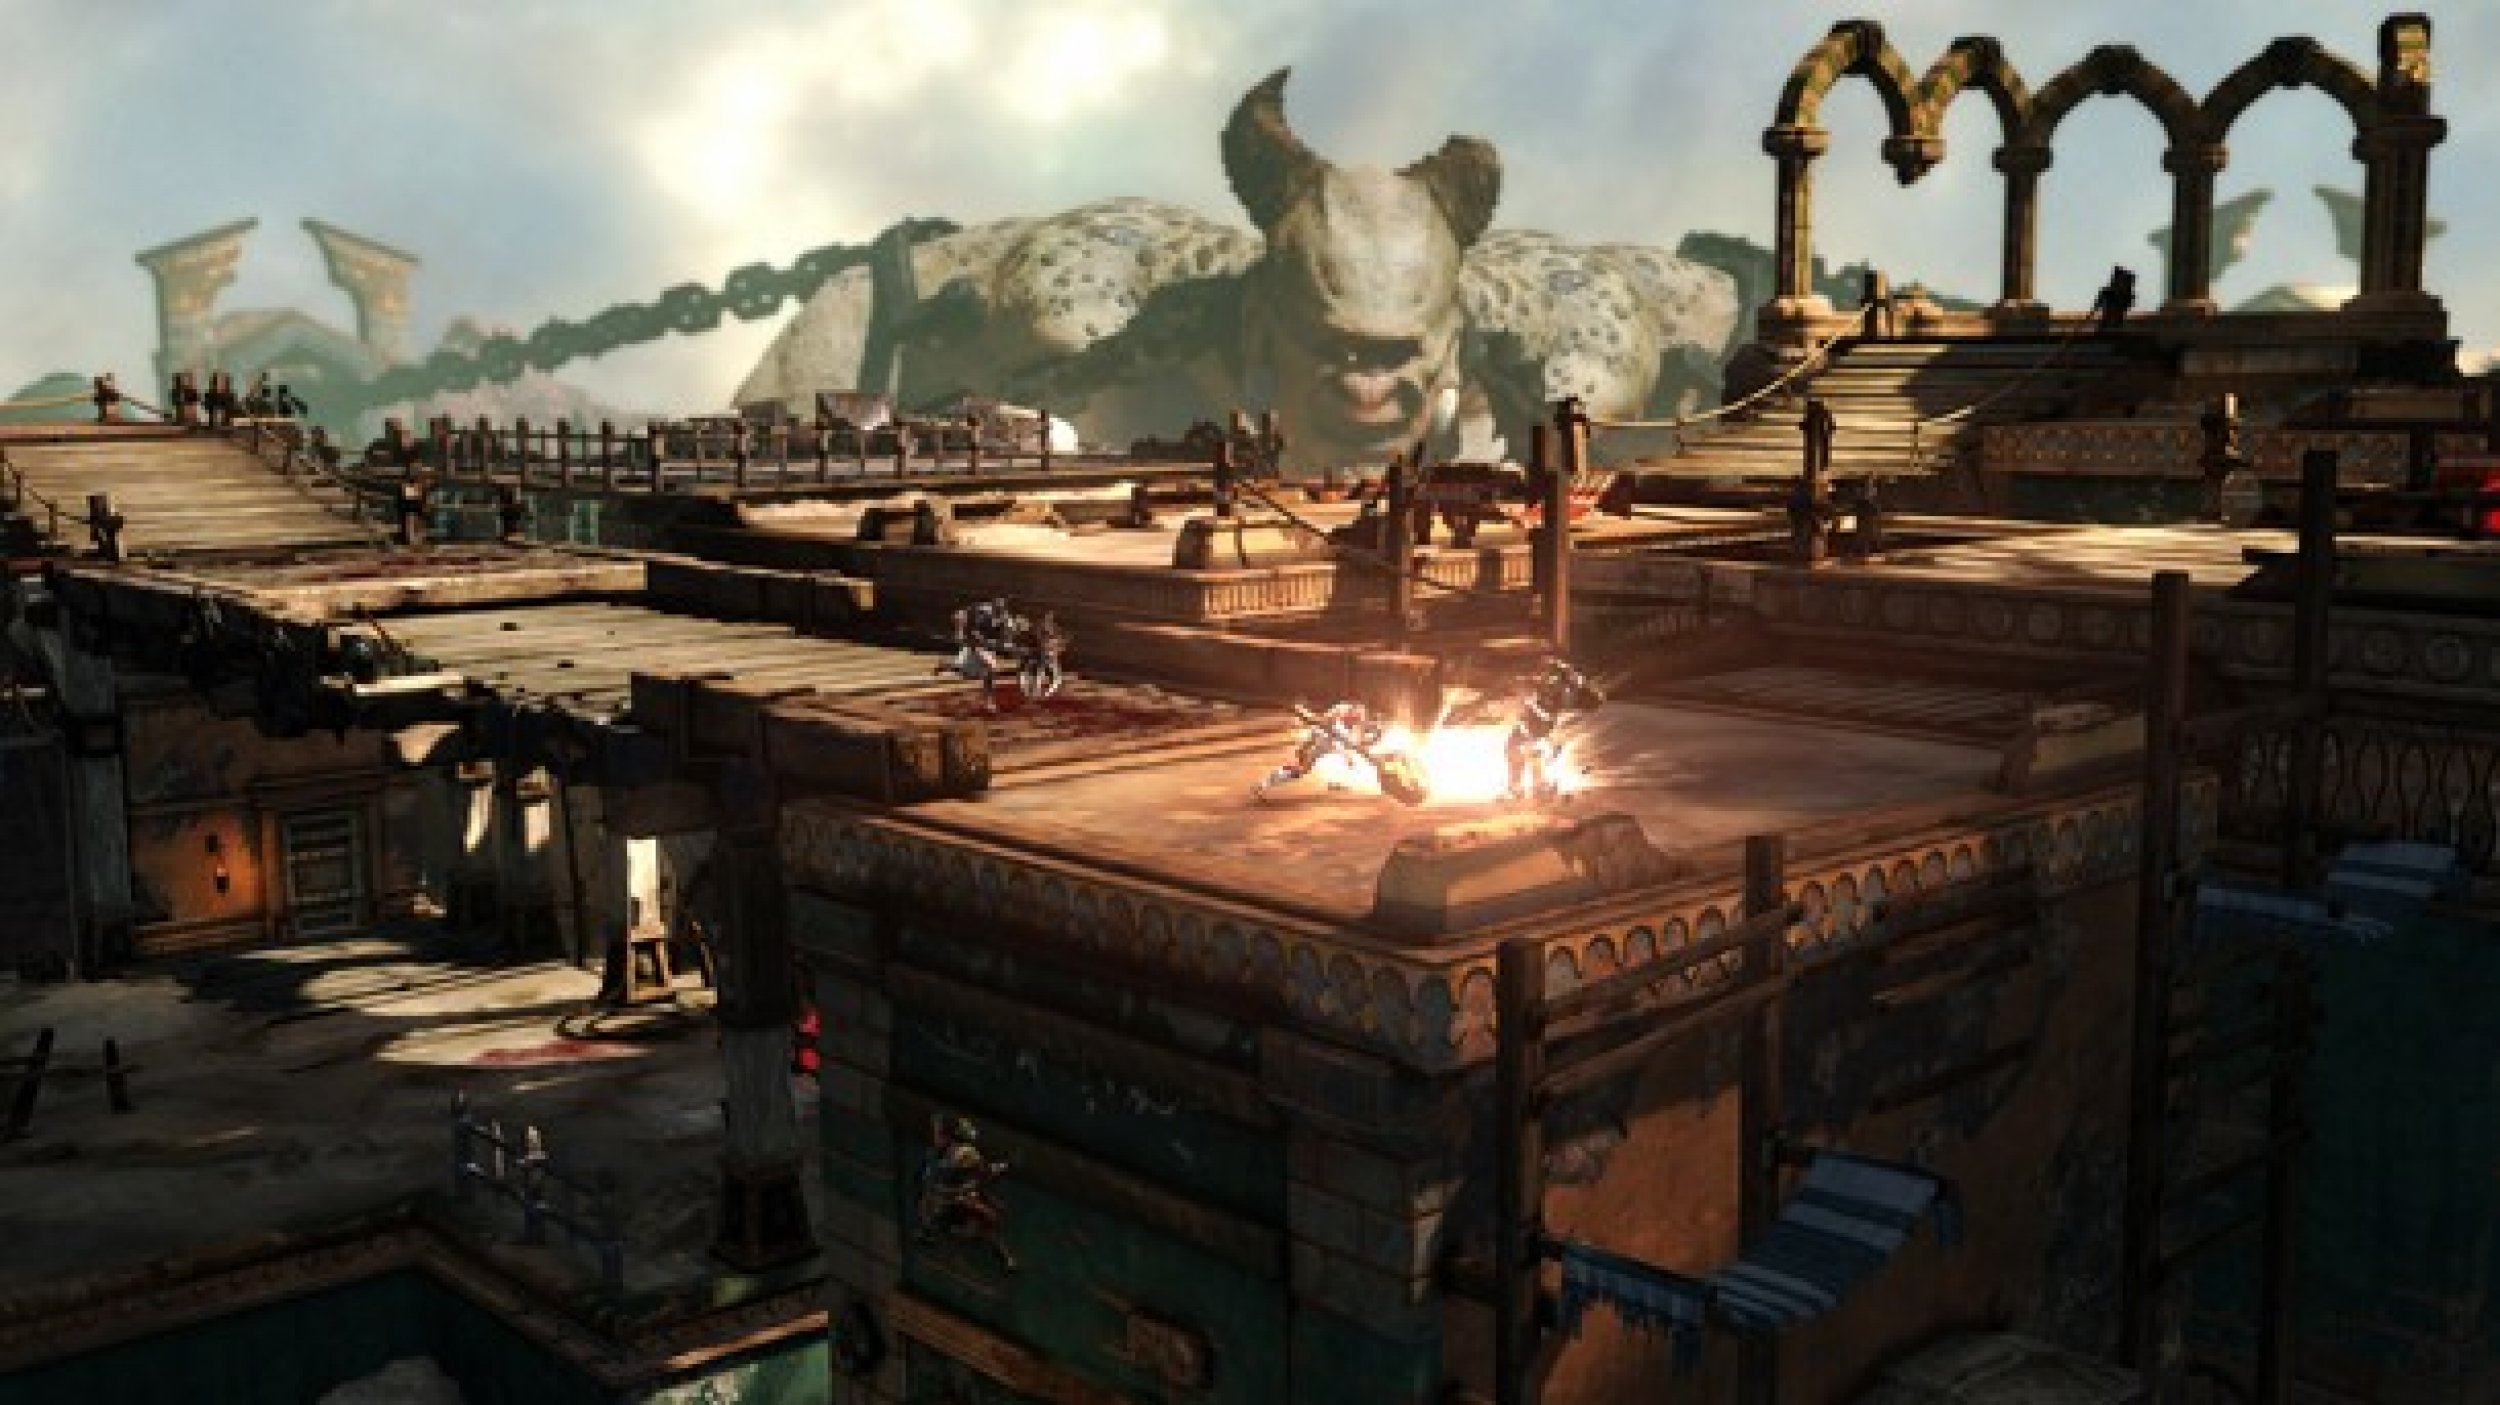 God Of War Multiplayer Mode For Ascension Prequel Revealed By Sony PHOTOS